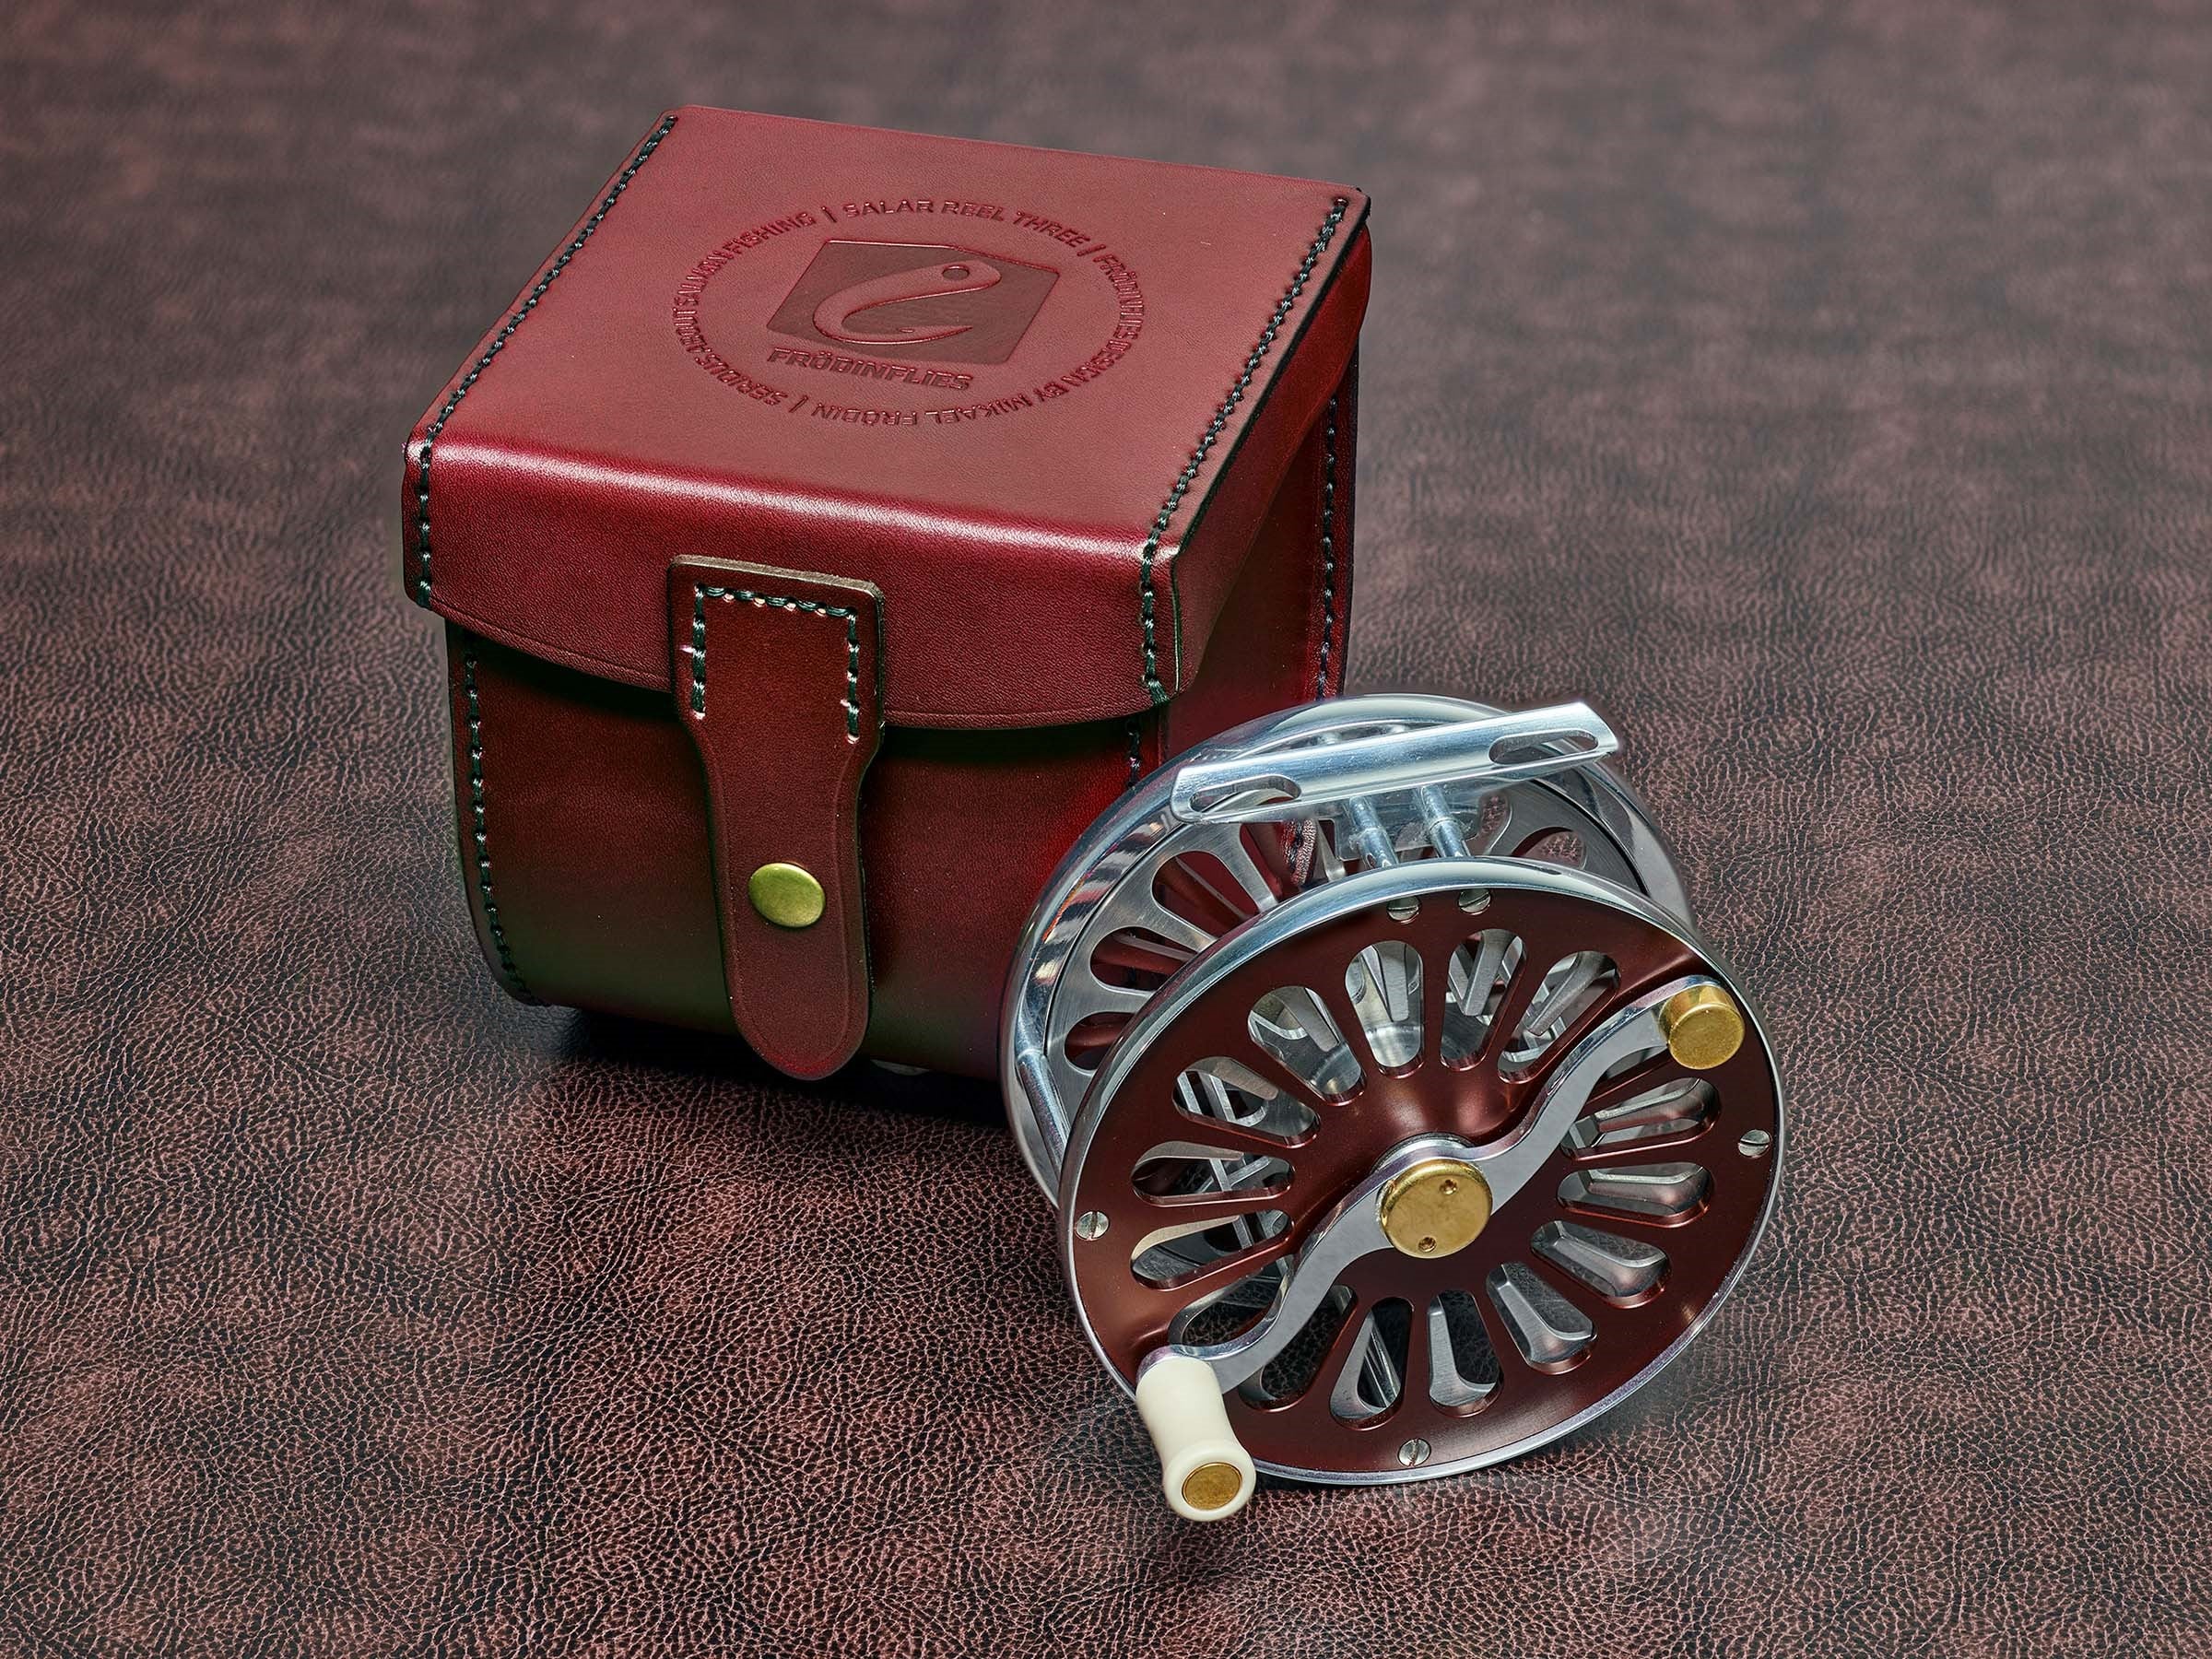 SALAR Reel One 'Limited Edition